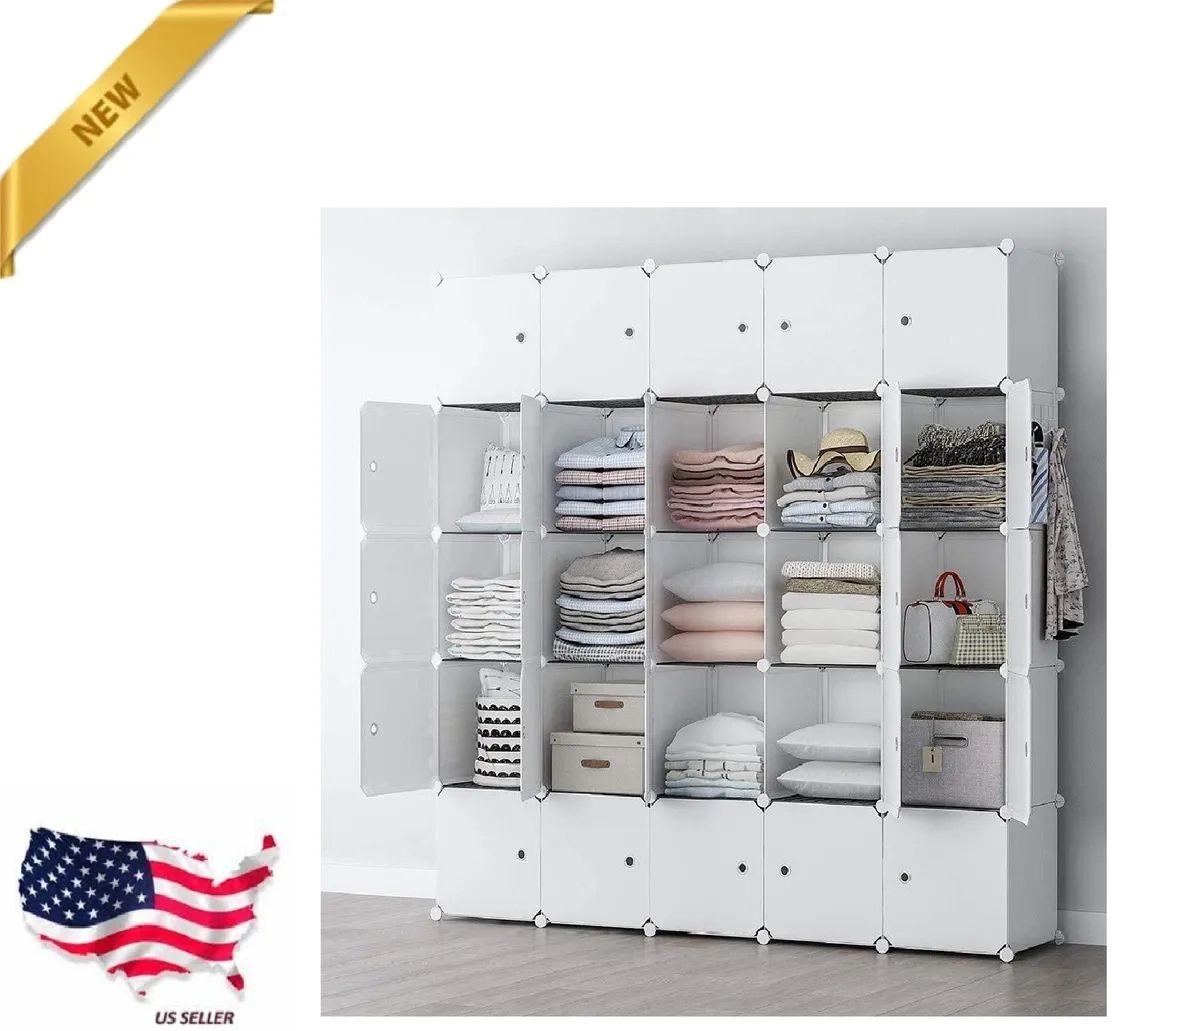 Cube Storage Organzier Portable Closet Wardrobe Bedroom Dresser 25 Cubes  White | Ebay Within Wardrobes With Cube Compartments (View 11 of 15)